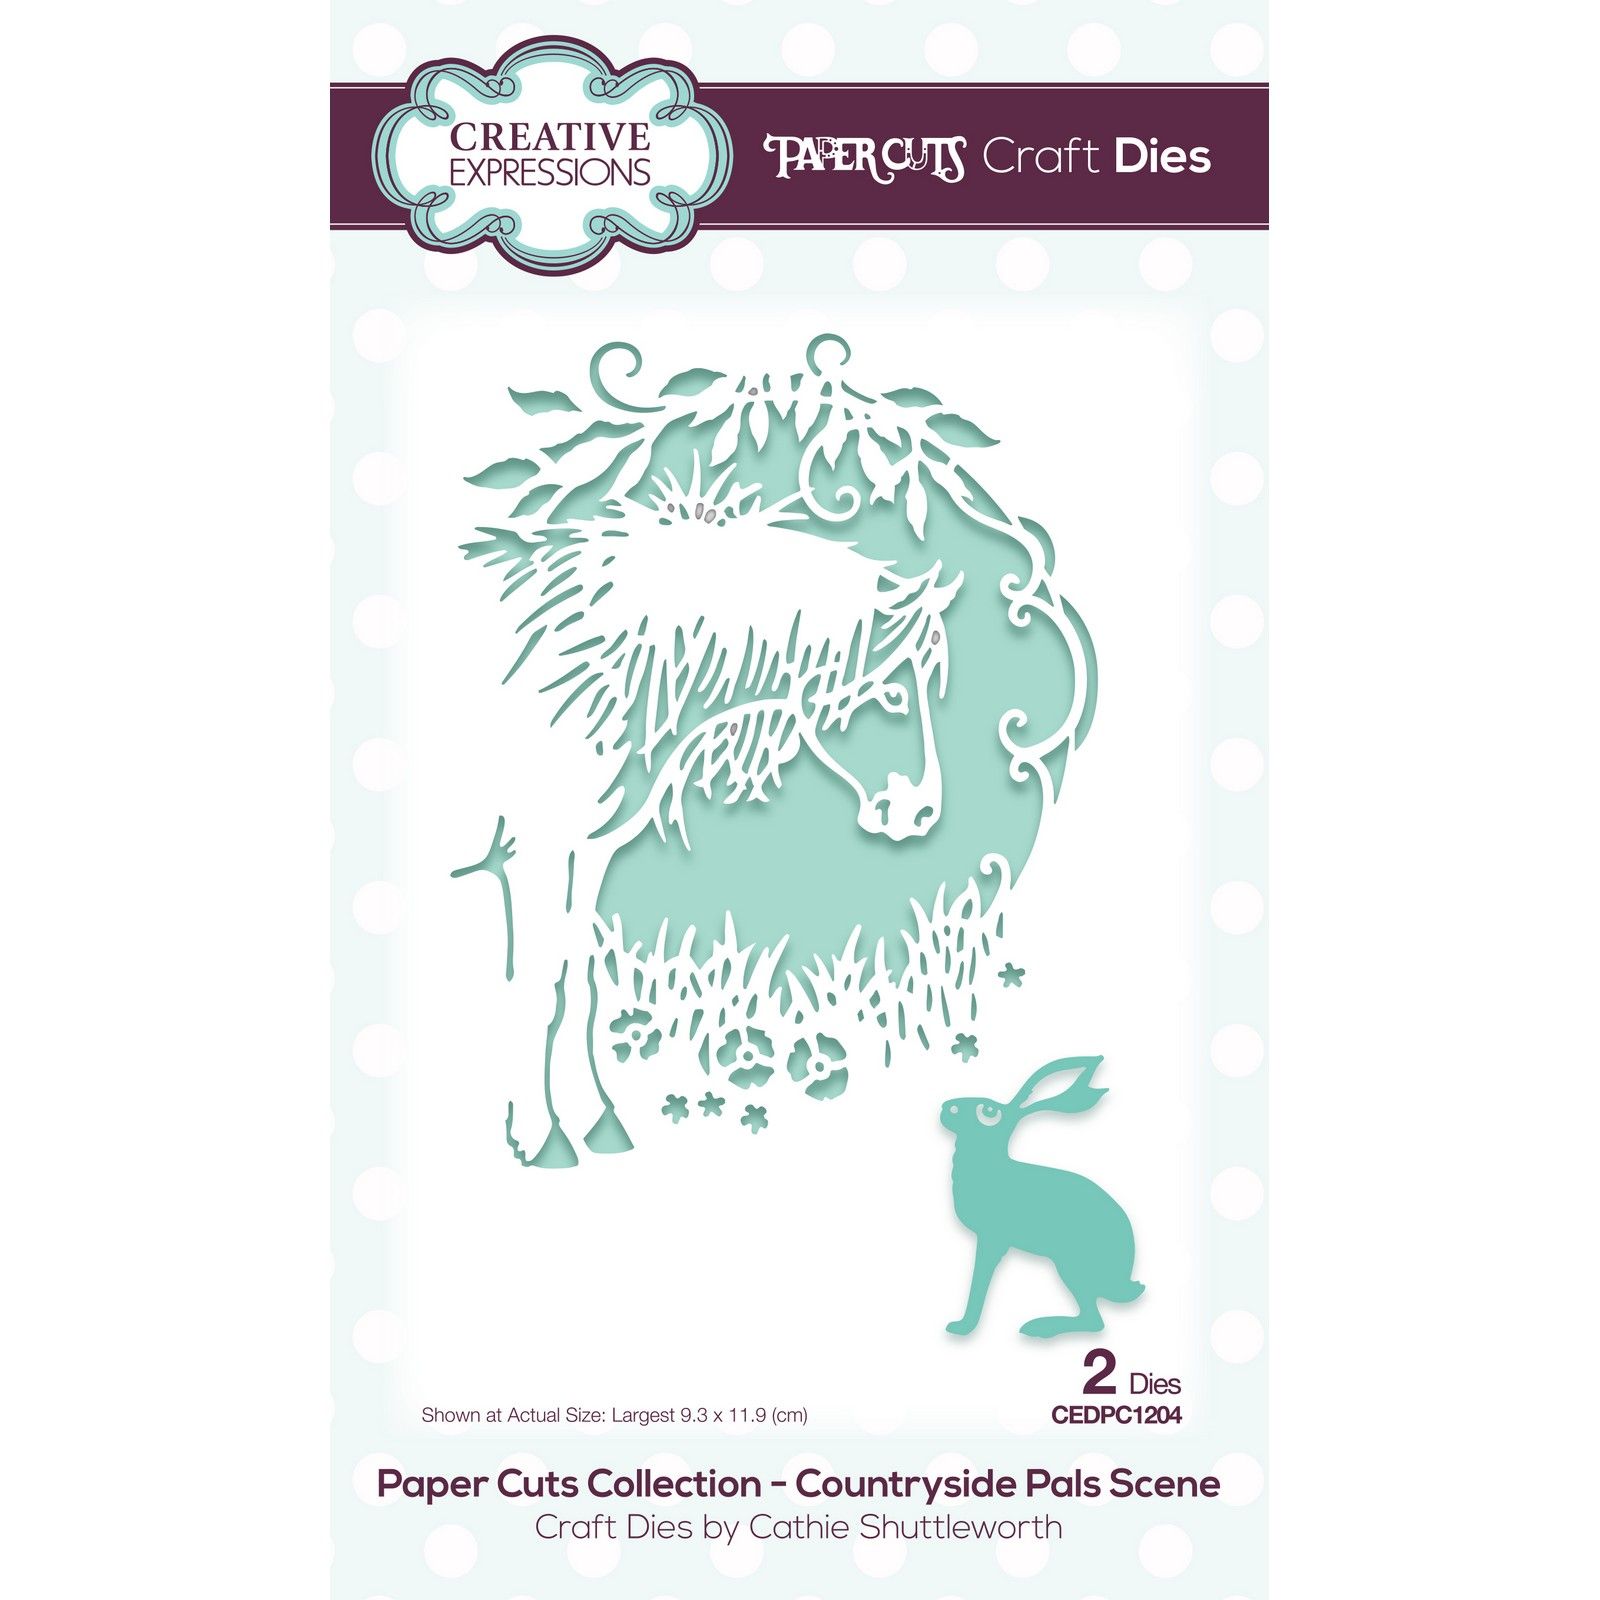 Paper Cuts • Craft Die Countryside Pals